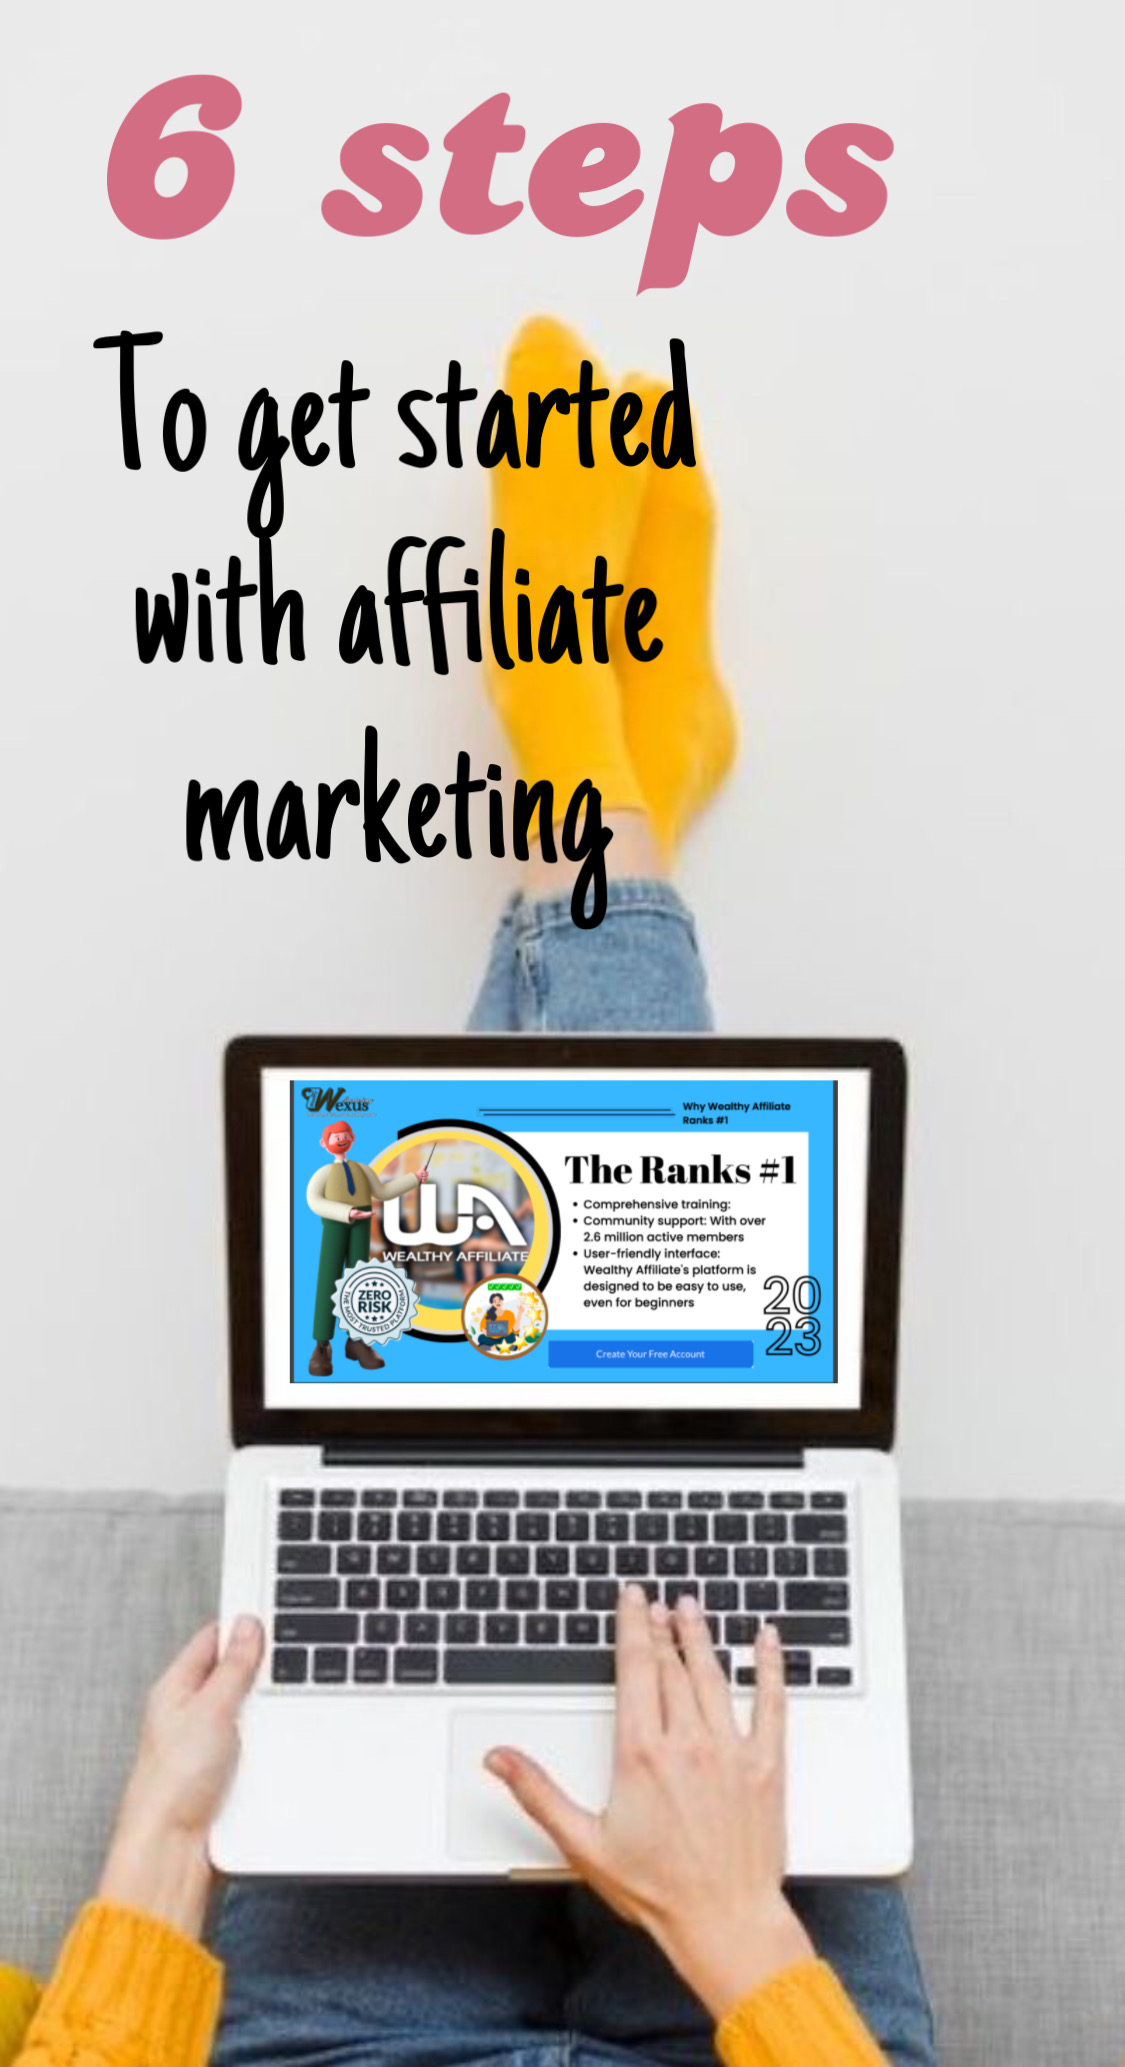 steps to get started with affiliate marketing and create passive income: 